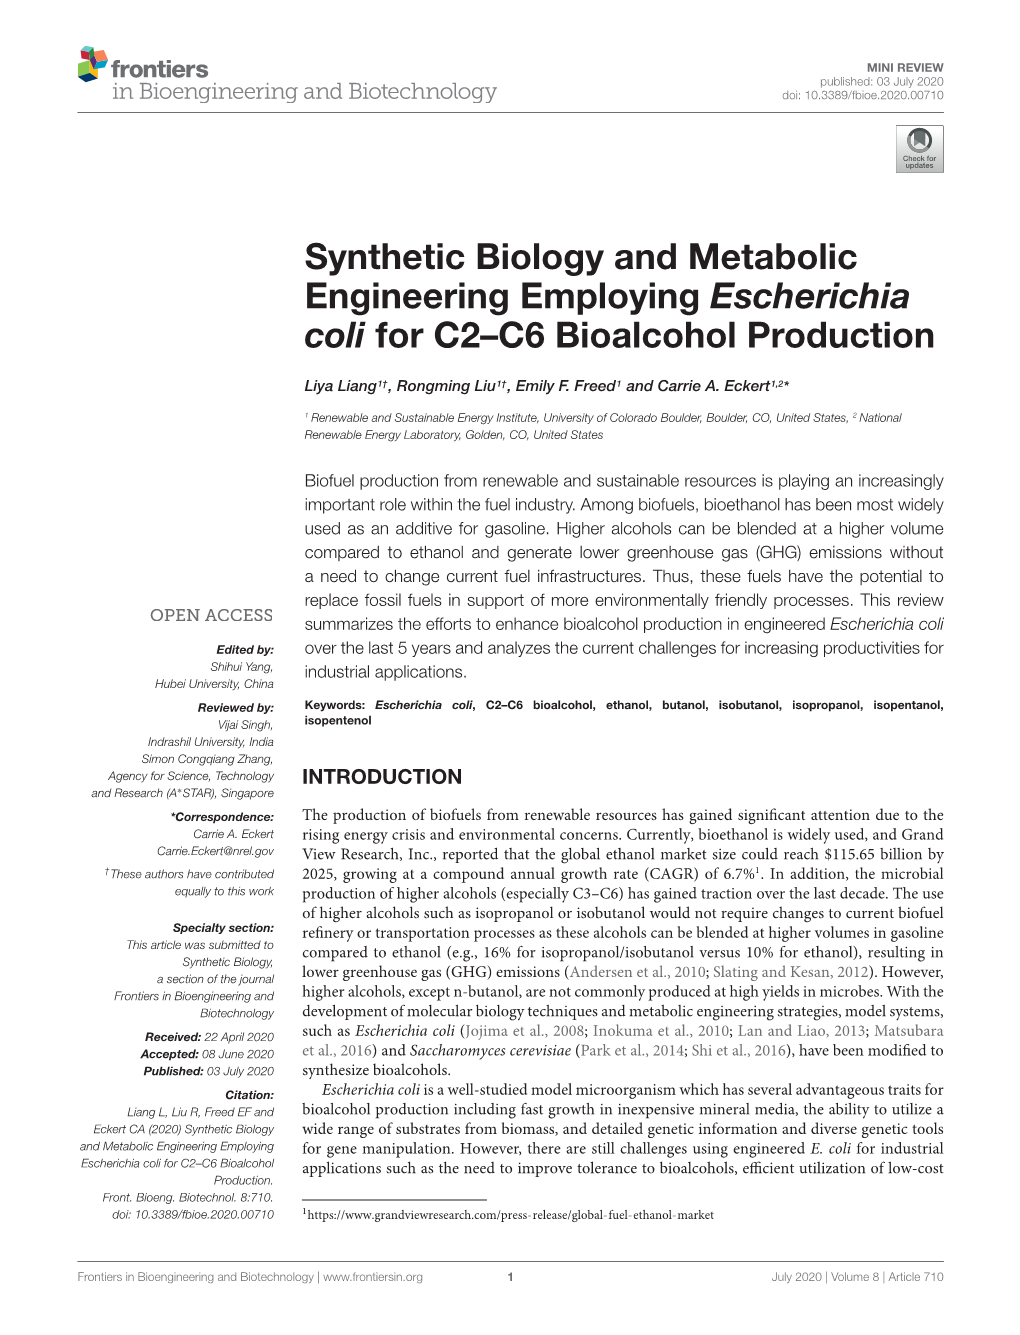 Synthetic Biology and Metabolic Engineering Employing Escherichia Coli for C2–C6 Bioalcohol Production